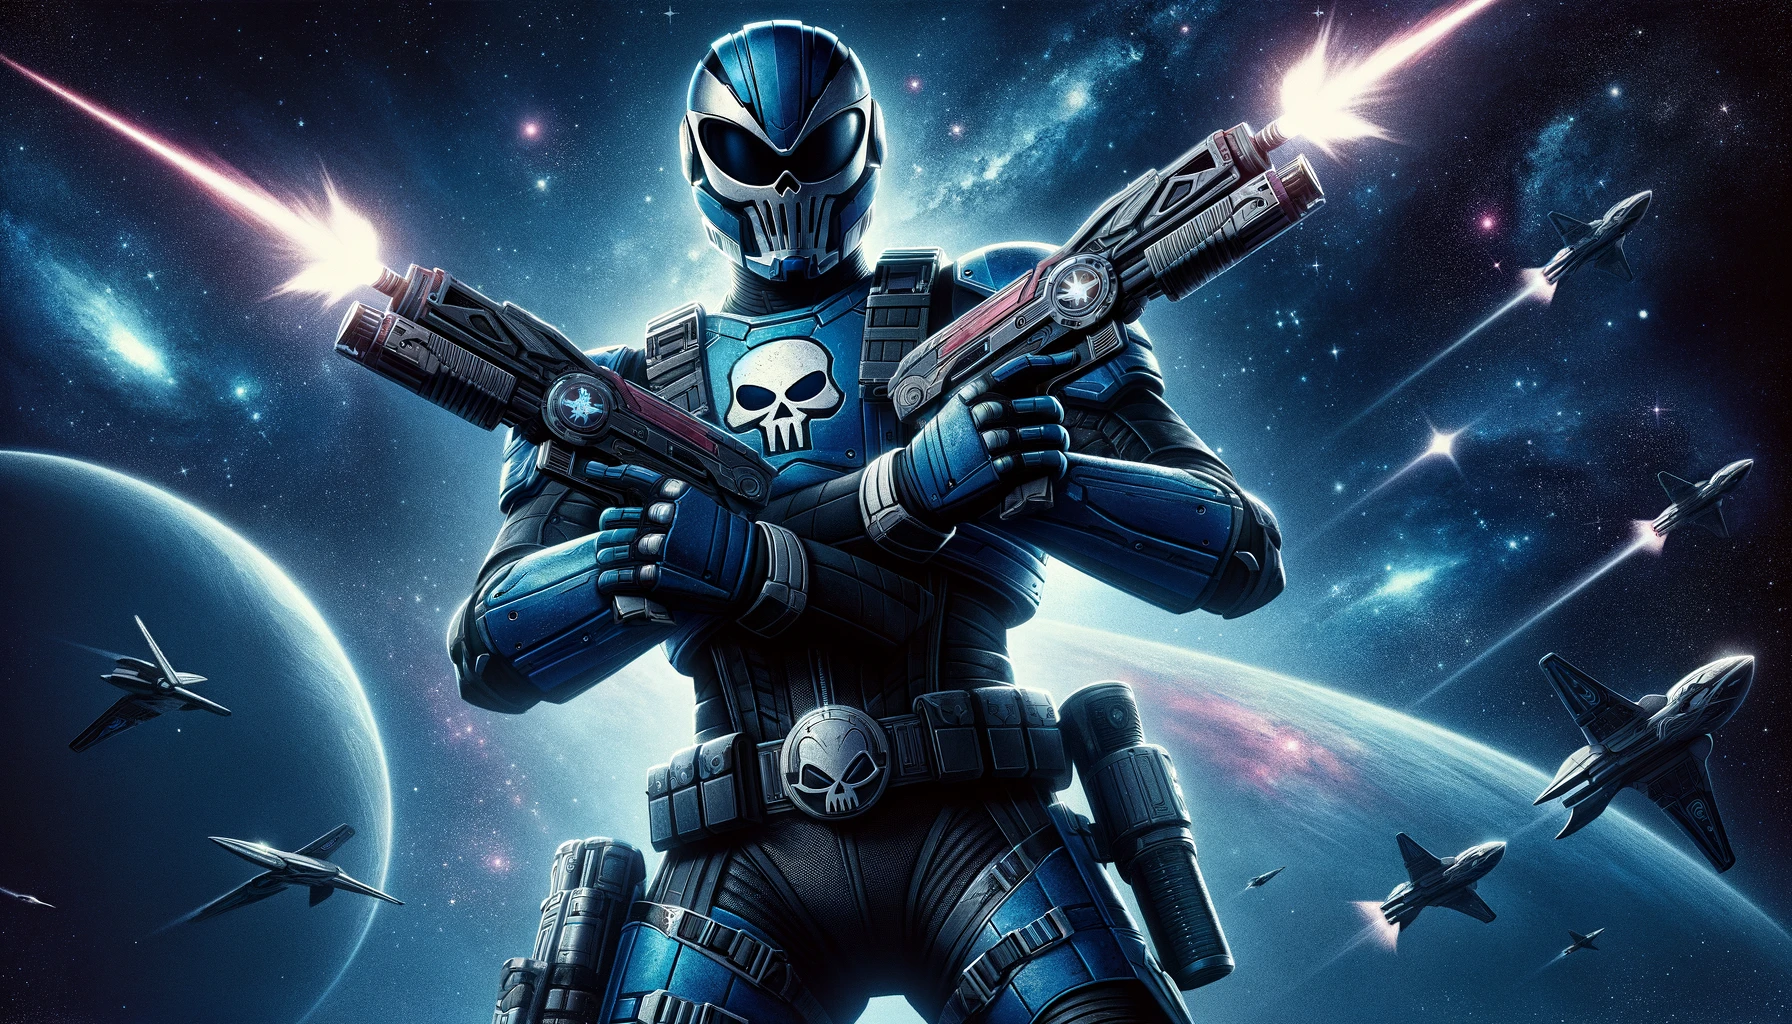 Space warrior with skull mask, dual blasters firing, amidst a cosmic battle with starships.